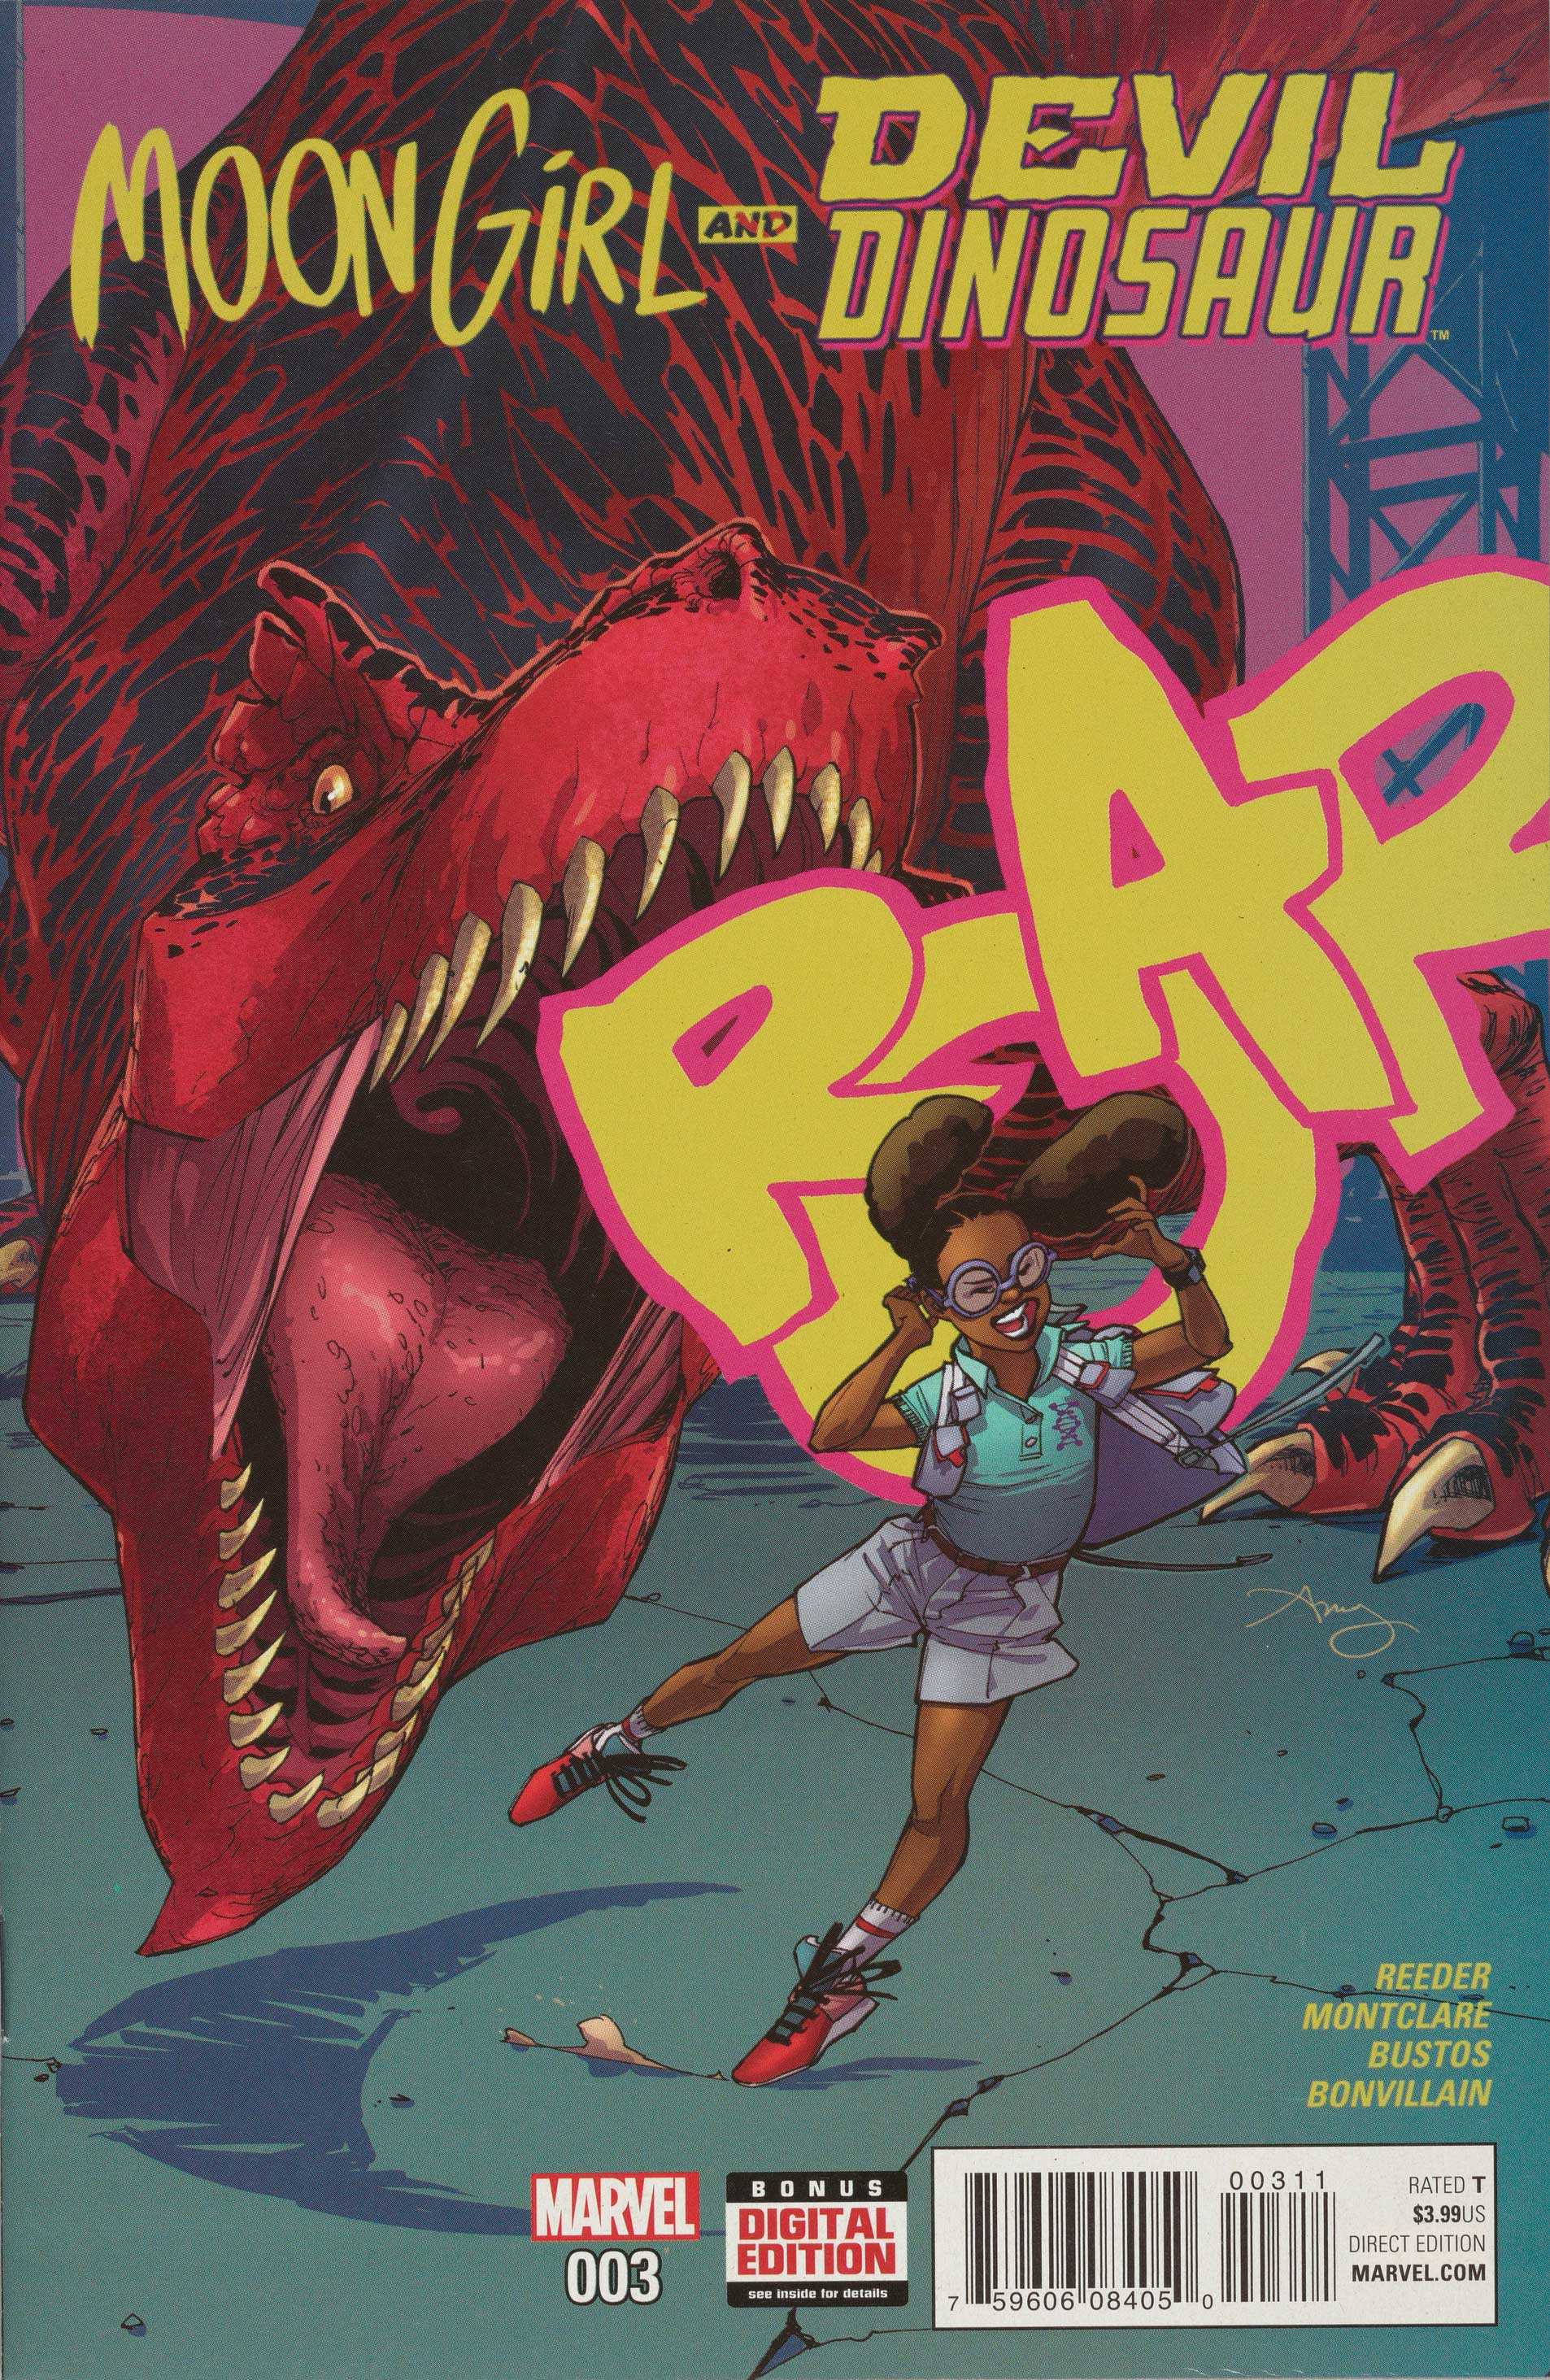 A cover of Moon Girl and the Devil Dinosaur. Moon girl looks as if she is gracefully flauing while the Sinosaur rawrs in the back.